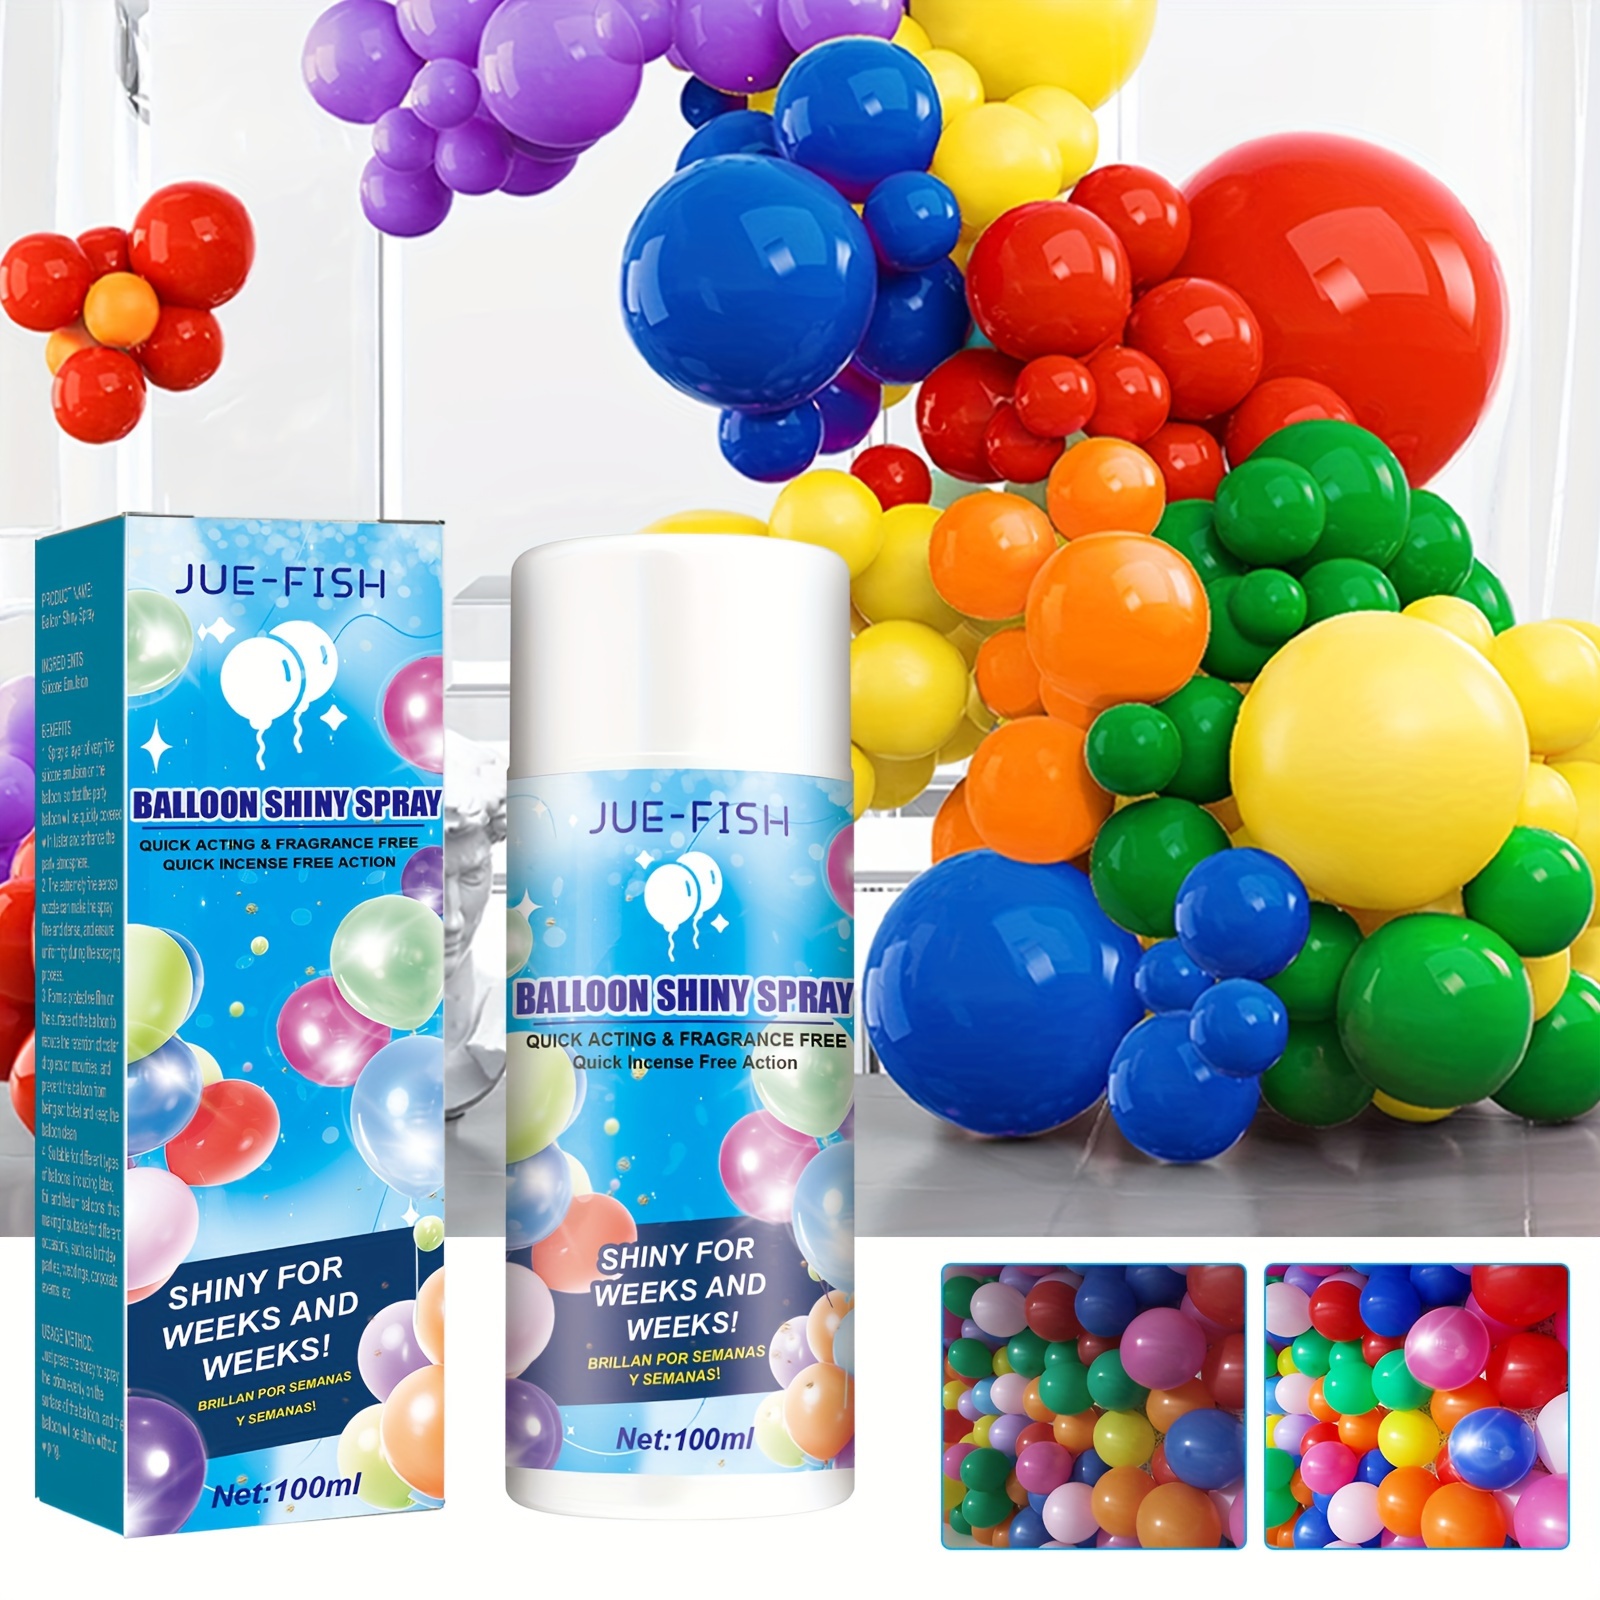 

High-gloss Balloon Shine Spray, 3.38oz - Fade-resistant & Non-toxic For Latex & Foil Balloons, Ideal For Parties & Events Balloon Accessories Pastel Balloons